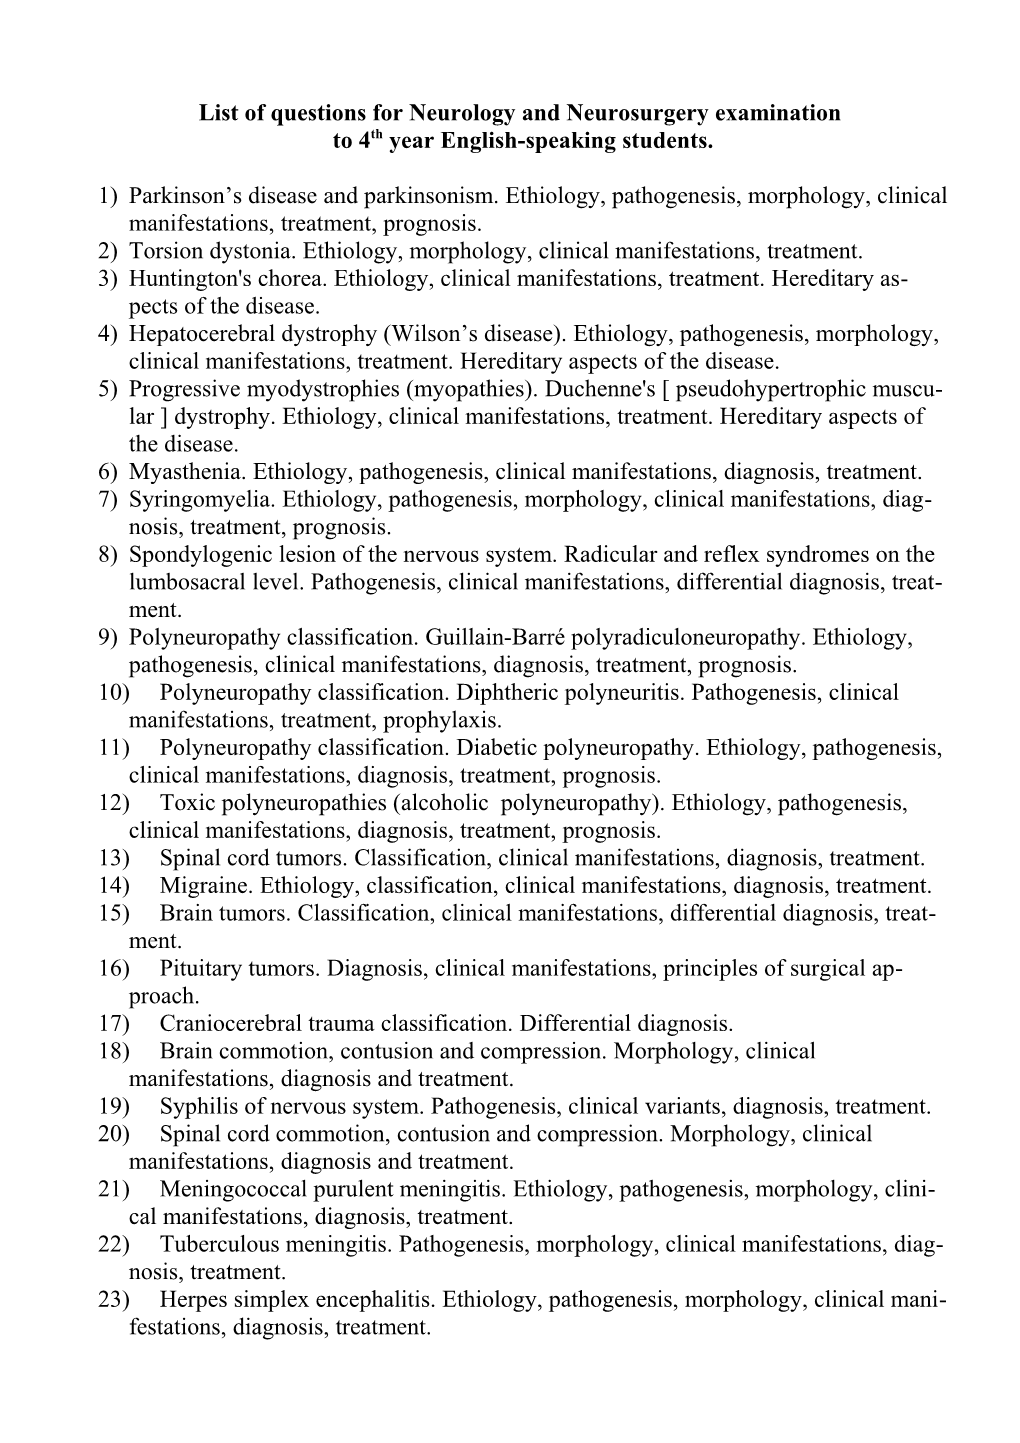 List of Questions for Neurology and Neurosurgery Examination to 4Th Year English-Speaking